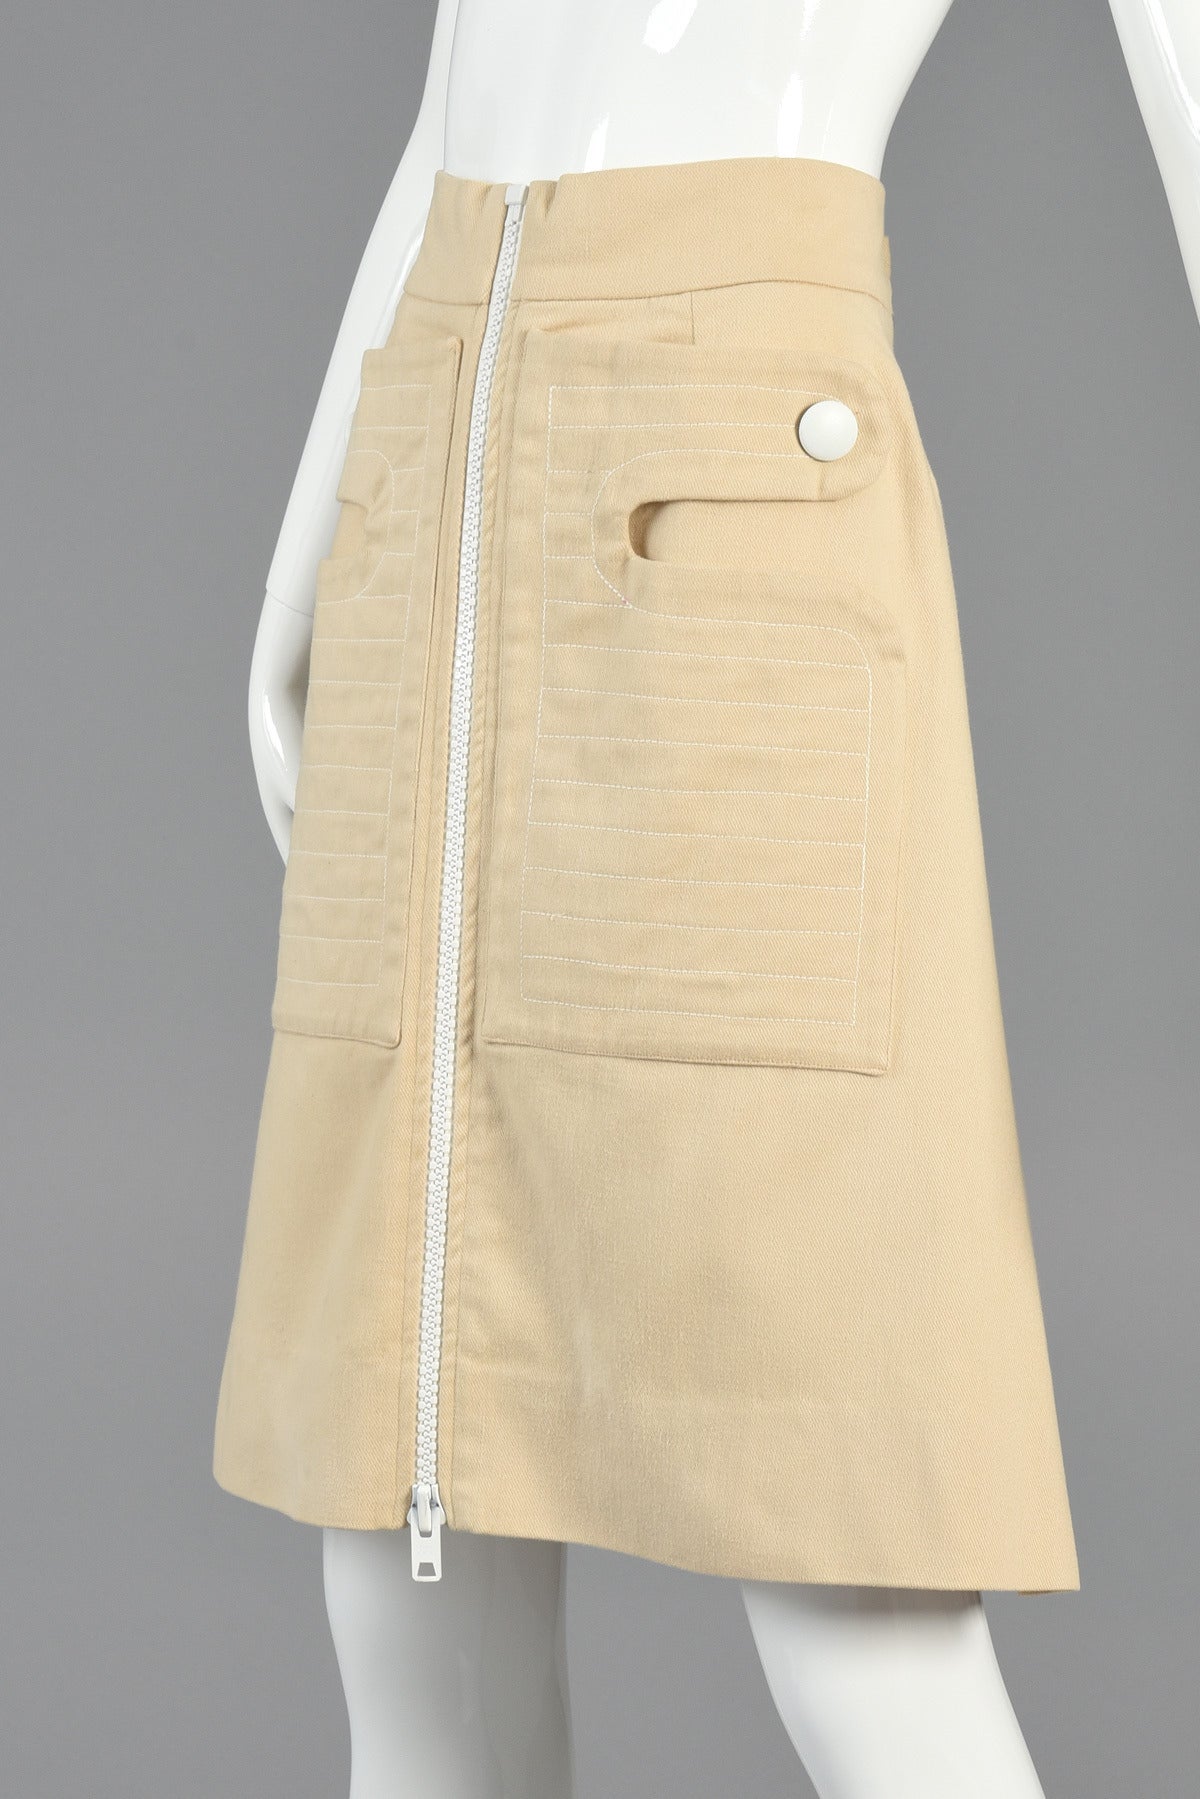 Pierre Cardin 1960's Zip Front Space Age Skirt For Sale 1